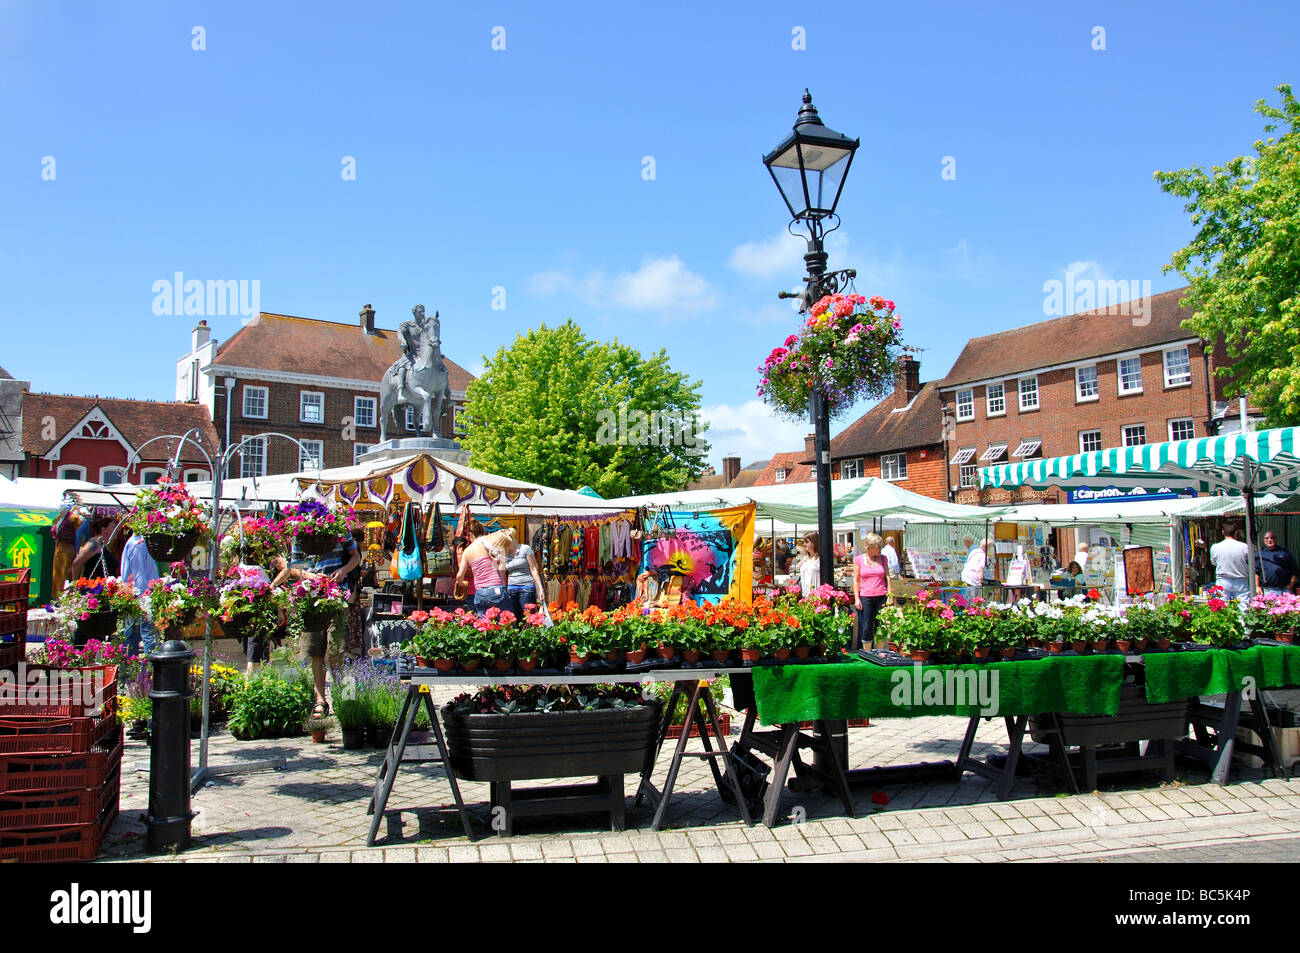 Outdoor market, The Square, Petersfield, Hampshire, England, United Kingdom Stock Photo